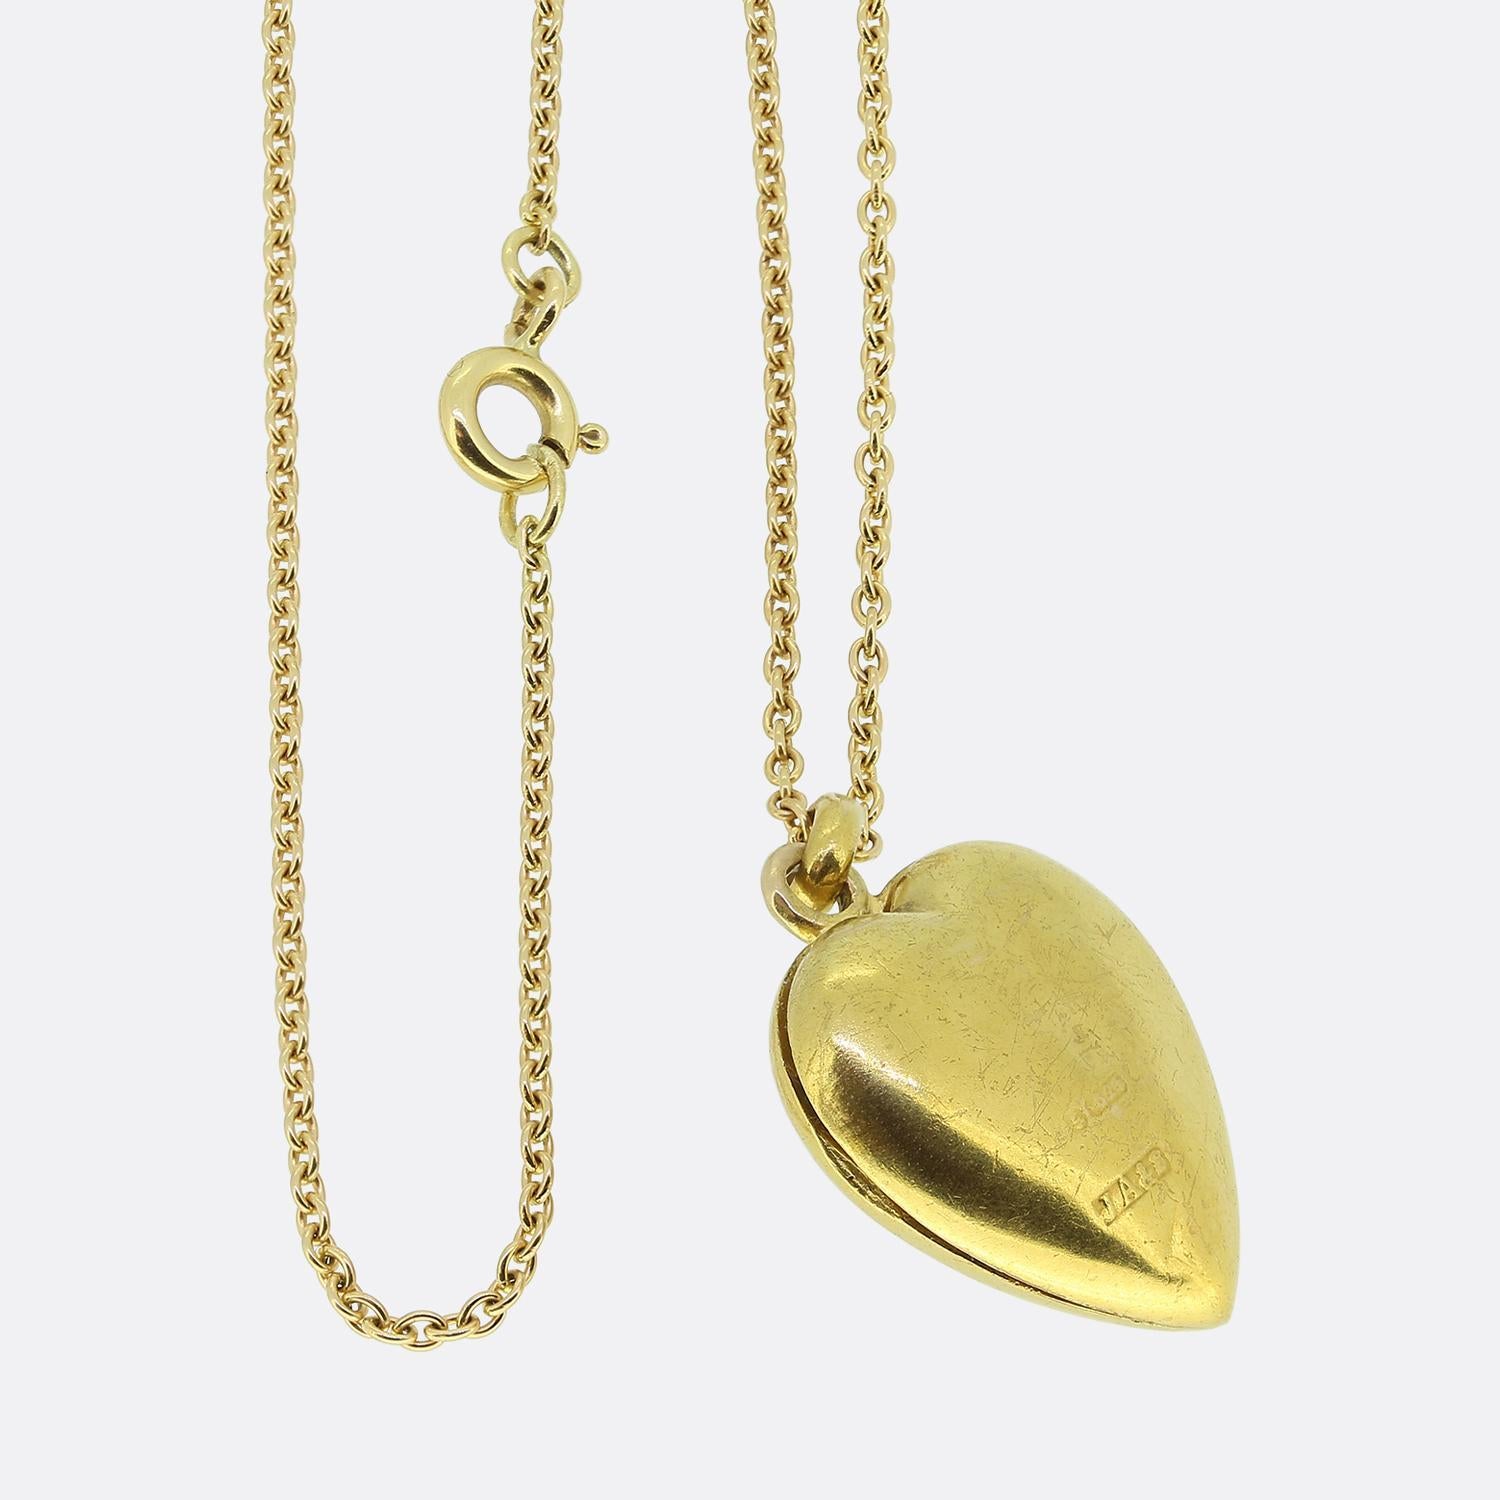 Here we have a beautiful diamond set locket pendant necklace. This antique pendant has been crafted from 15ct yellow gold into the the shape of a little love heart and expertly set with a duo of rose cut diamonds. This focal stone is